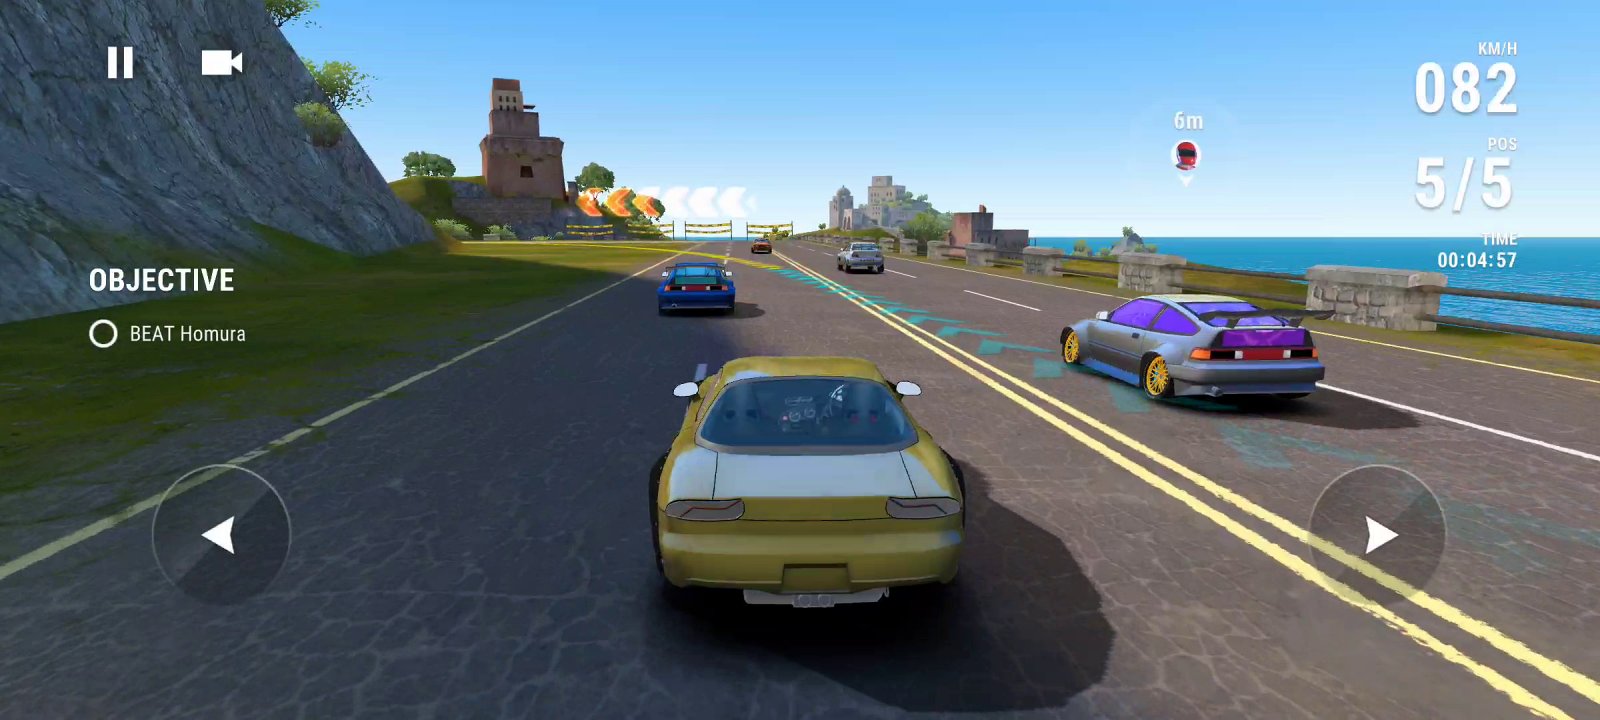 race-max-pro-android-game-1 Race Max Pro: Early Access Offline Racing Game on Android